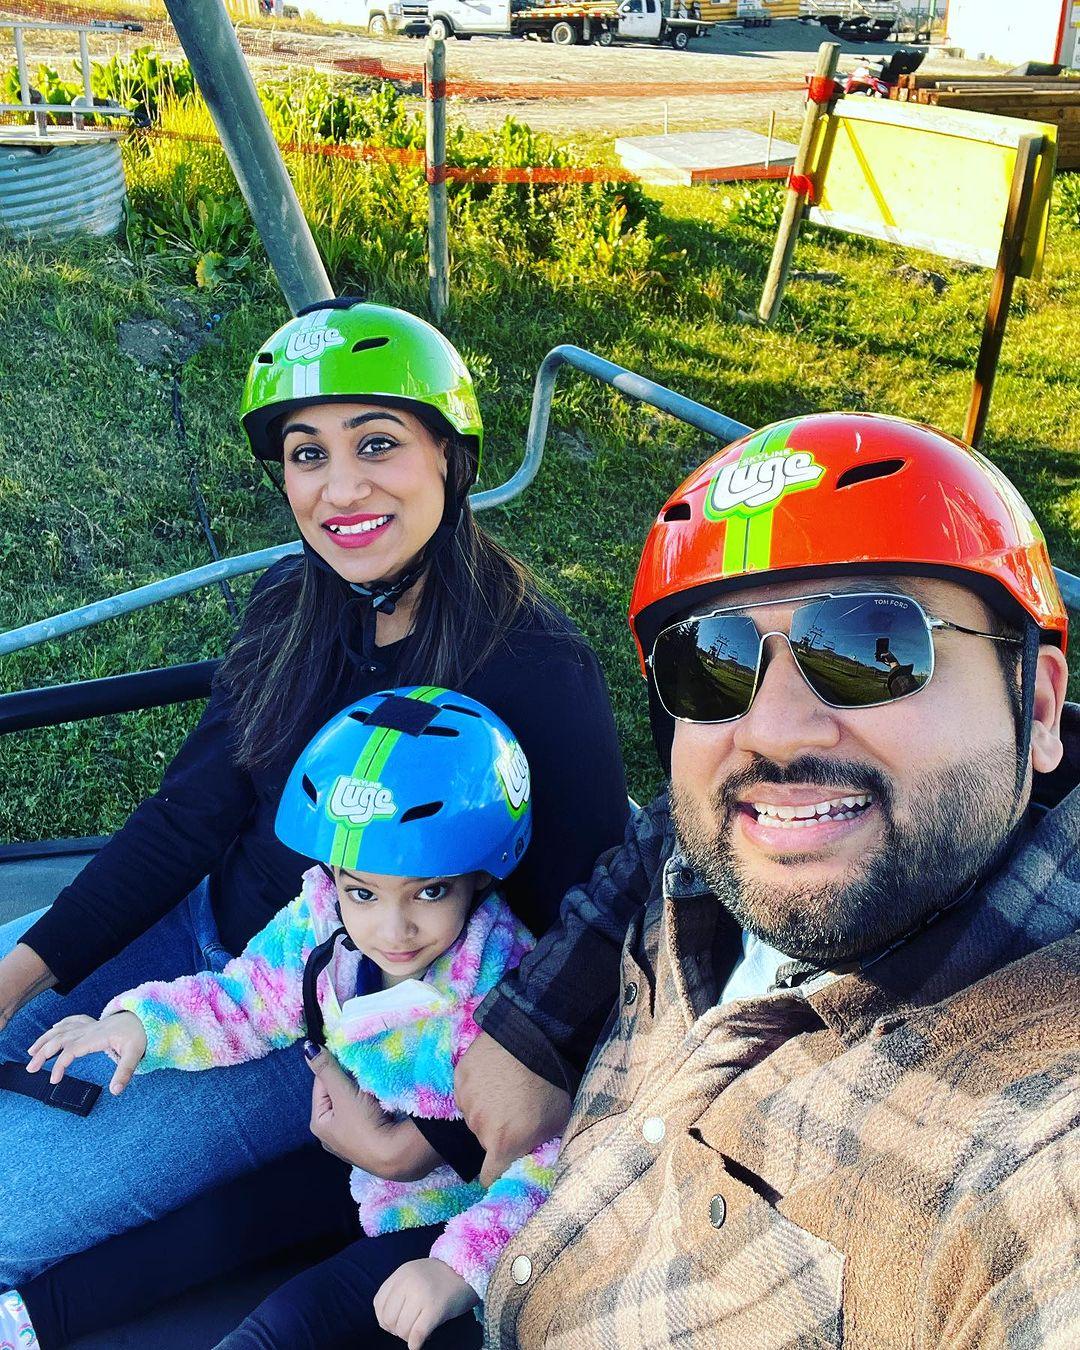 A family rides the Downhill Karting Calgary chairlift together.